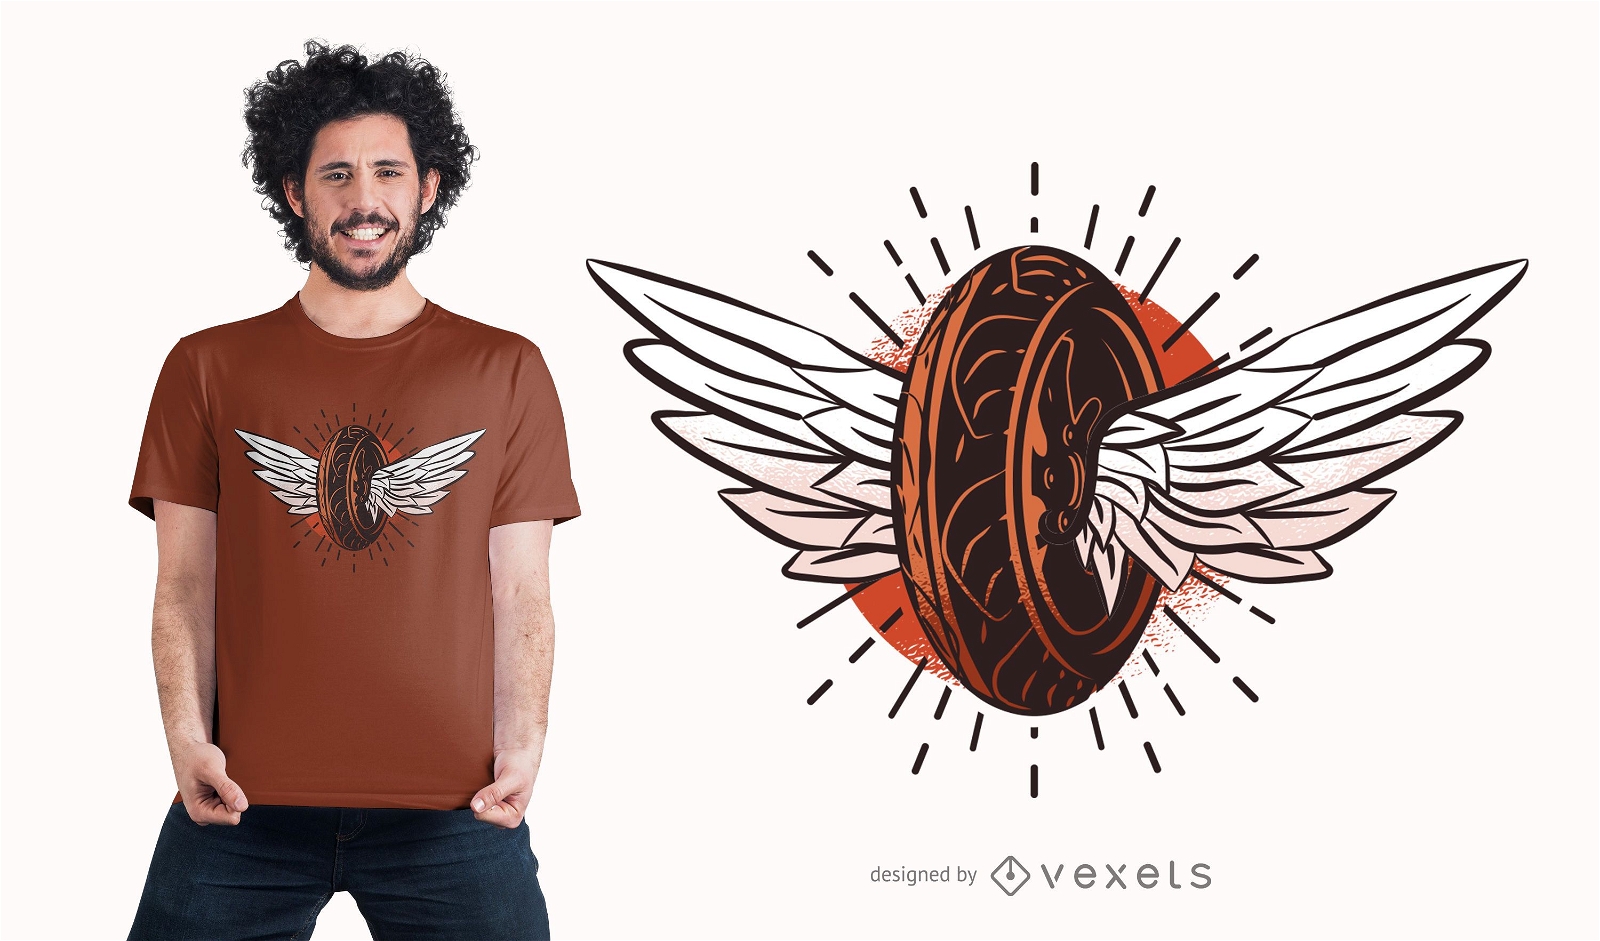 Tire with wings t-shirt design